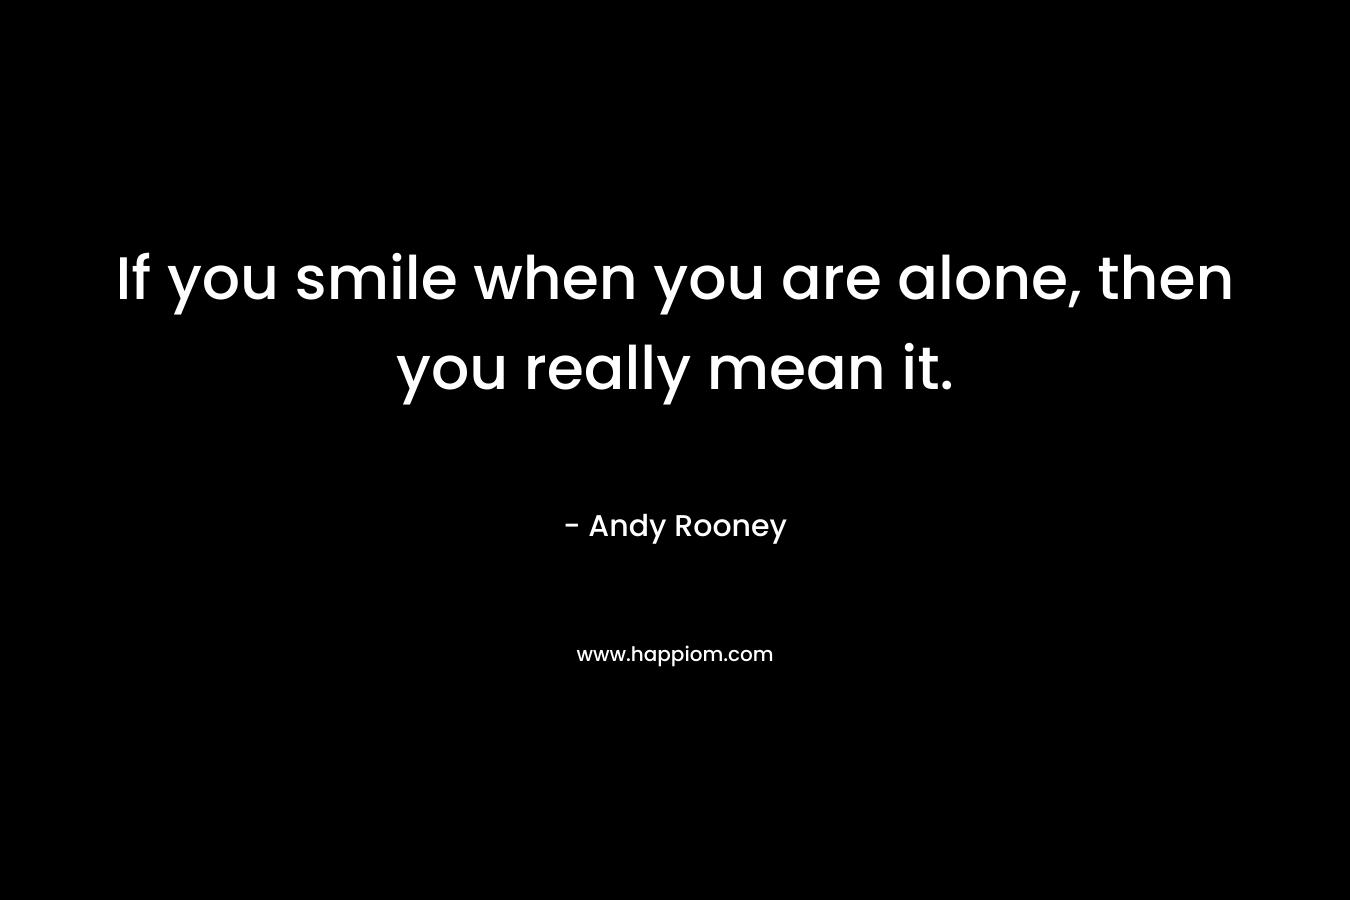 If you smile when you are alone, then you really mean it.